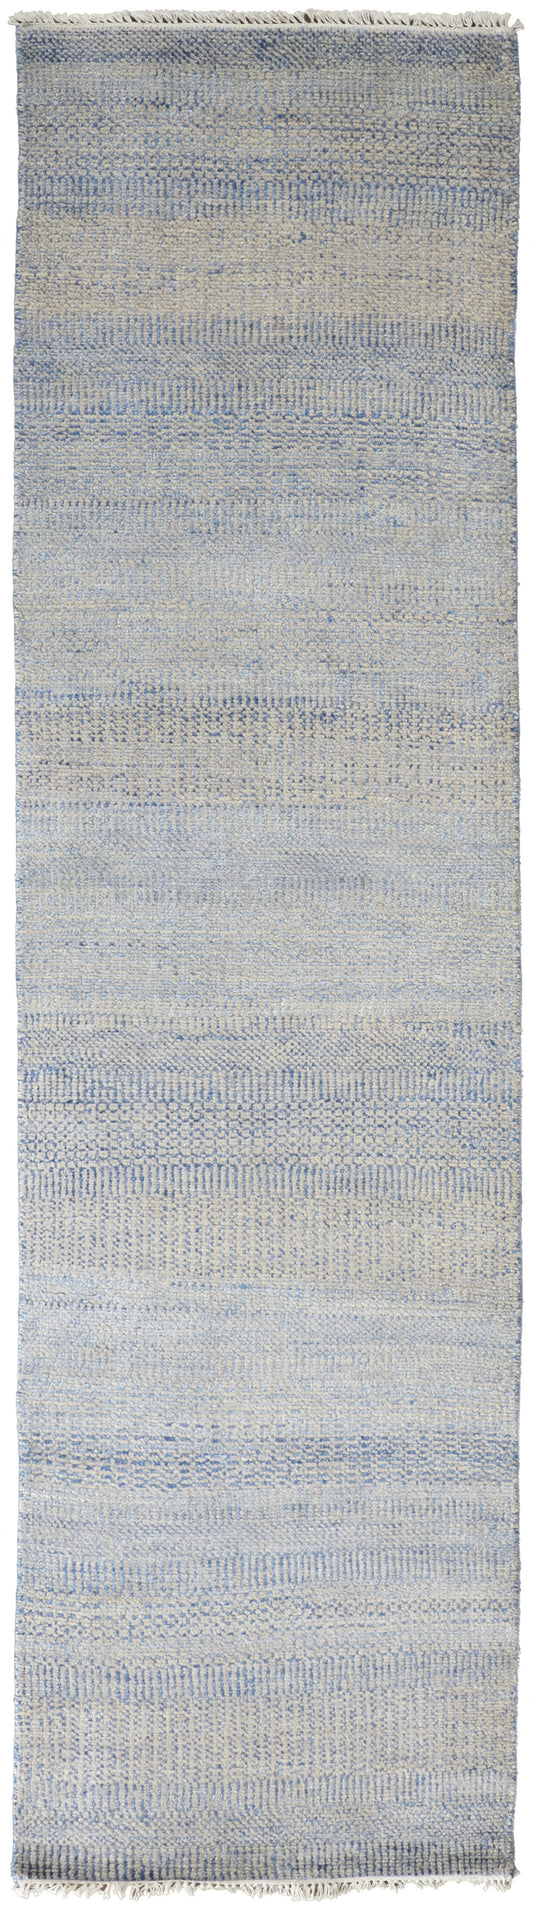 12' x 15' Blue and Silver Wool Striped Hand KNotted Area Rug